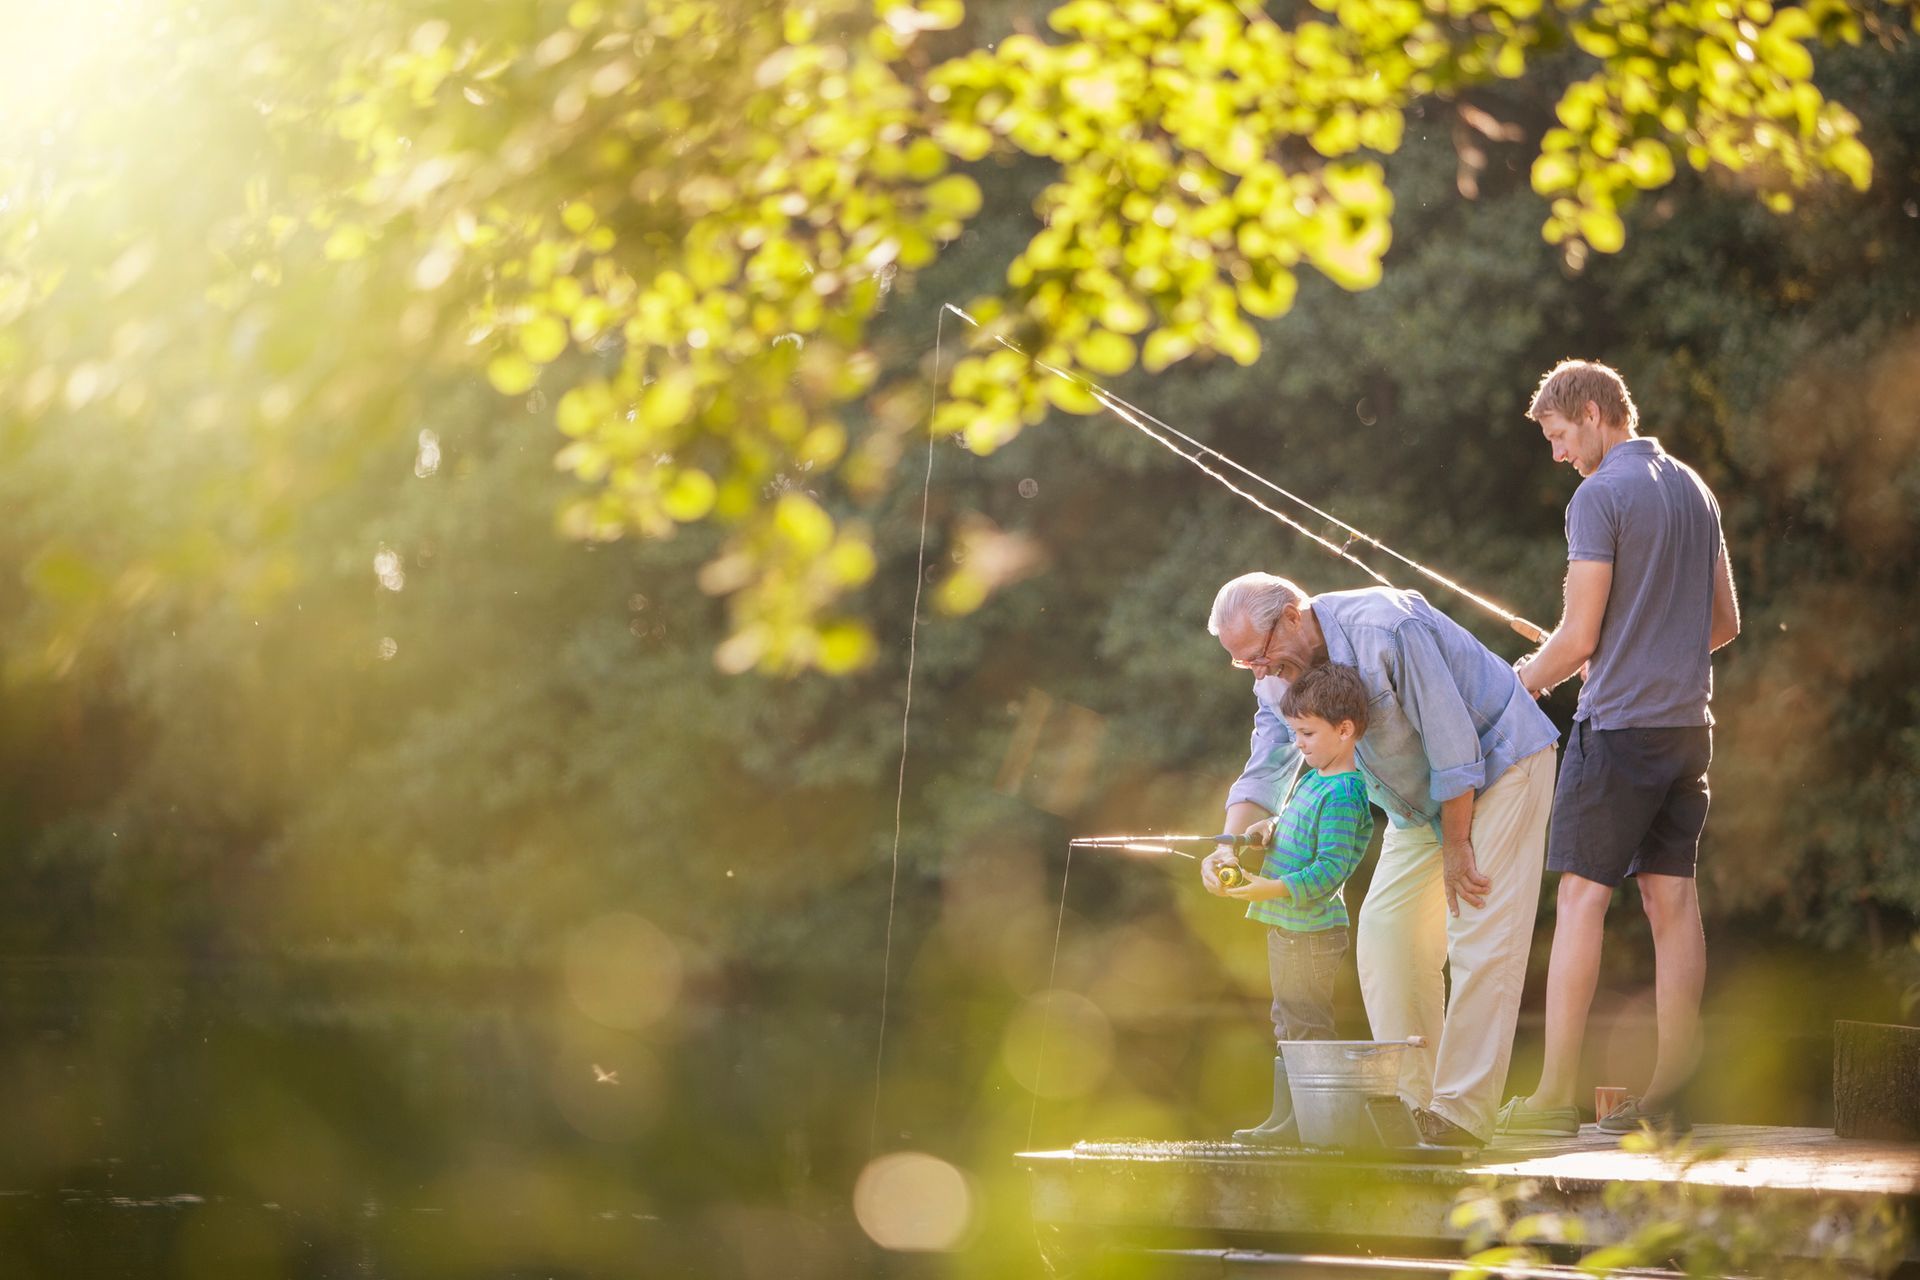 A family is fishing together on a lake.